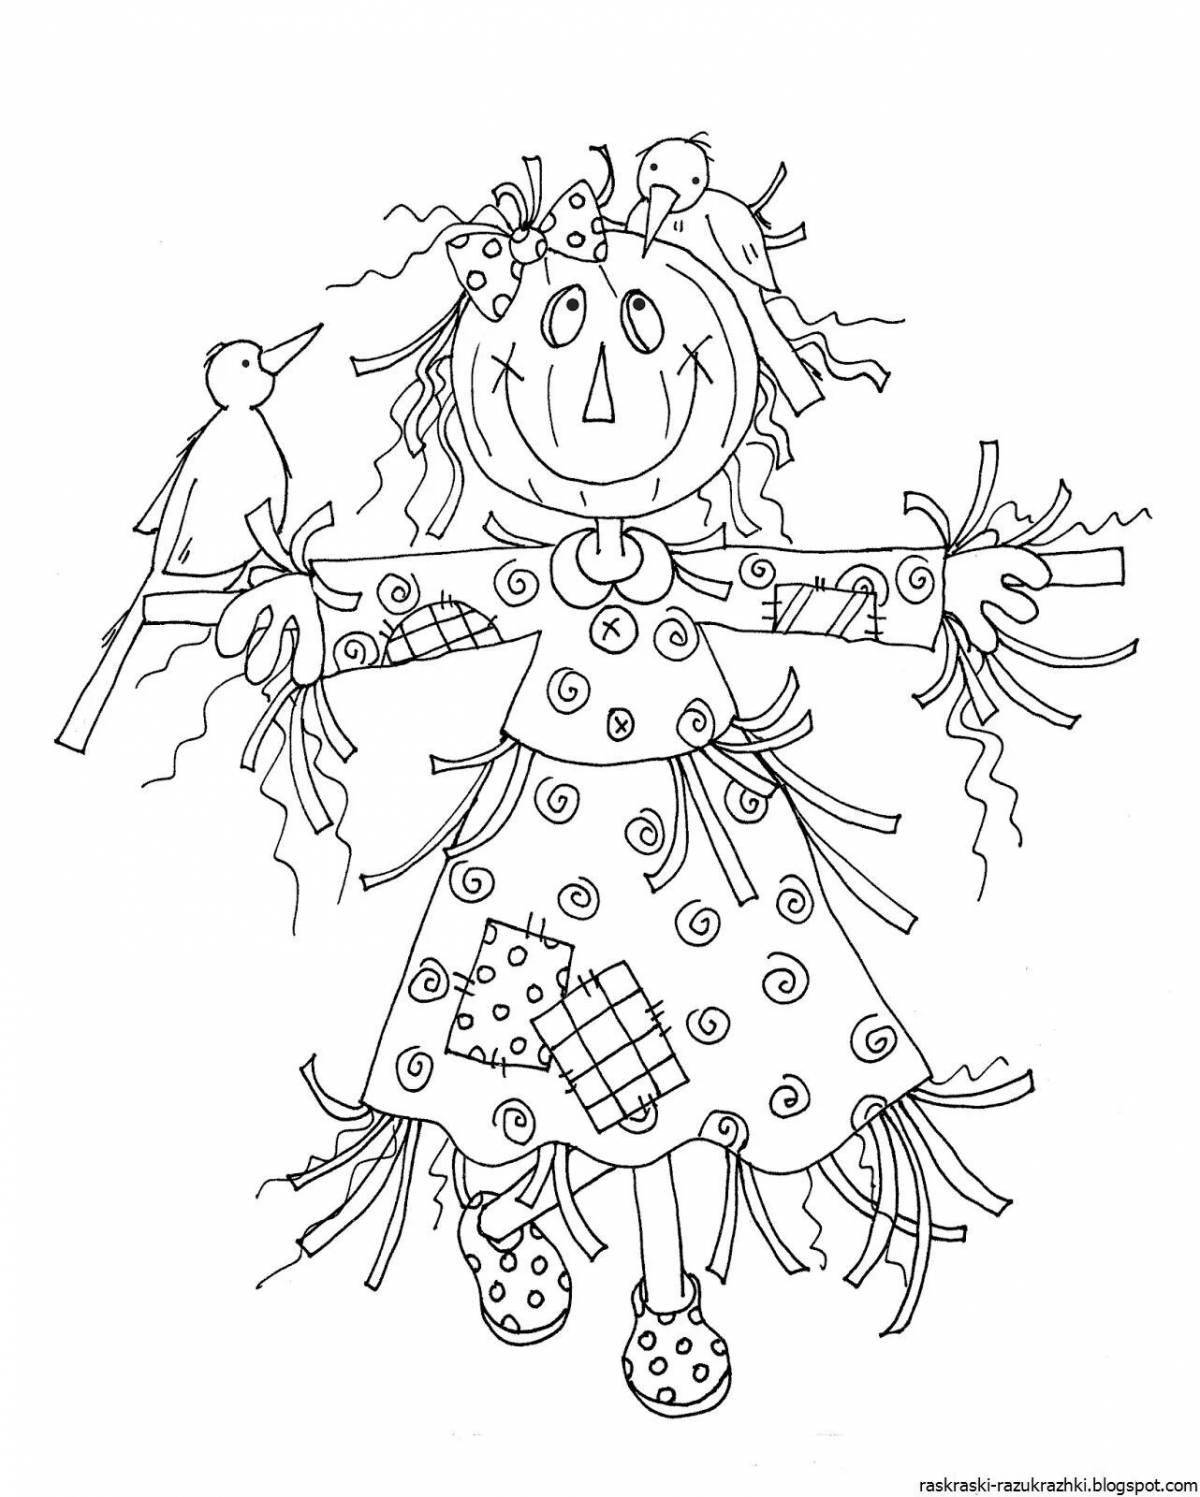 Playful carnival coloring page